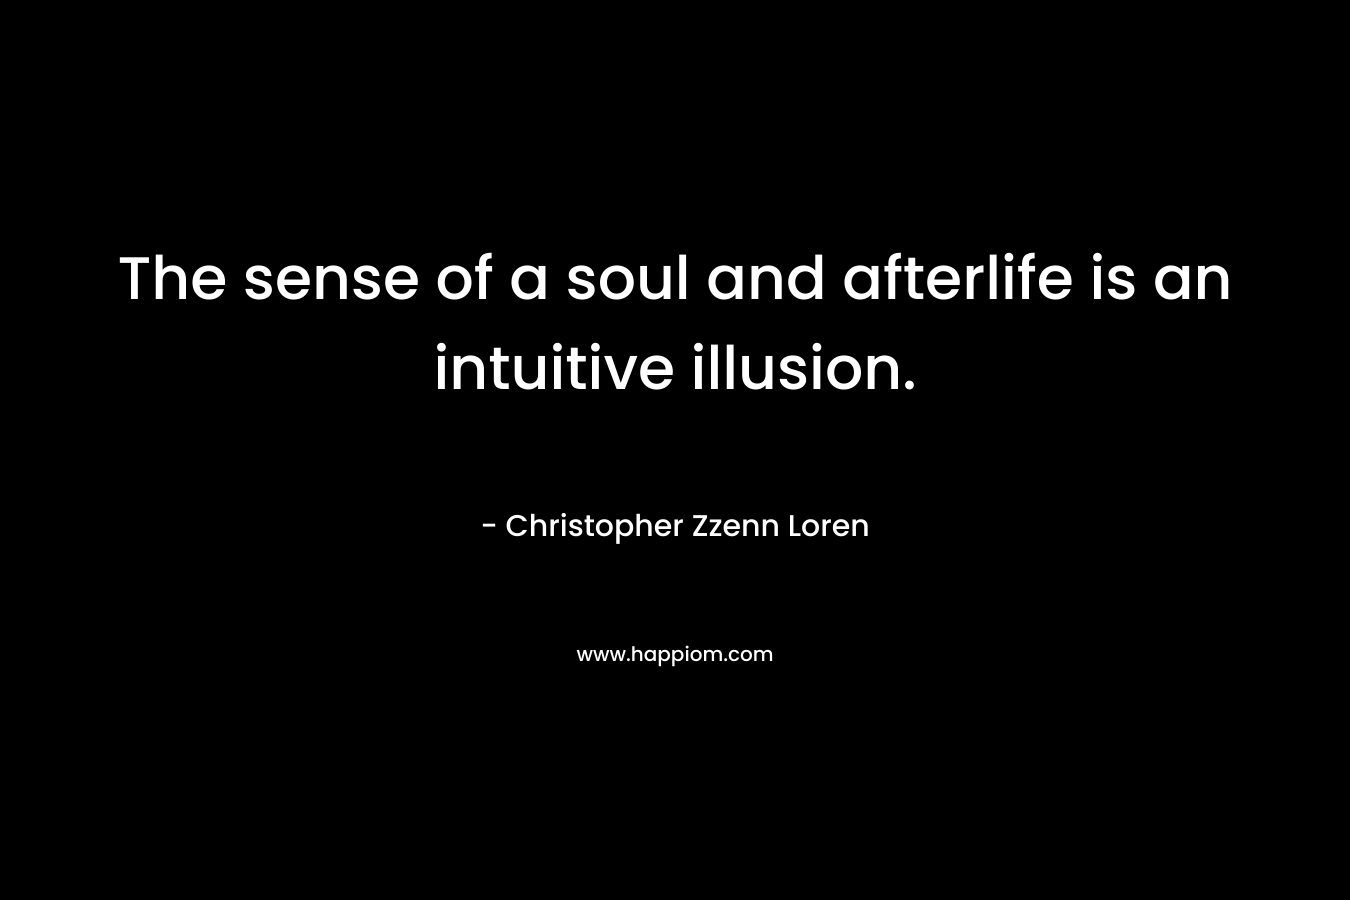 The sense of a soul and afterlife is an intuitive illusion.